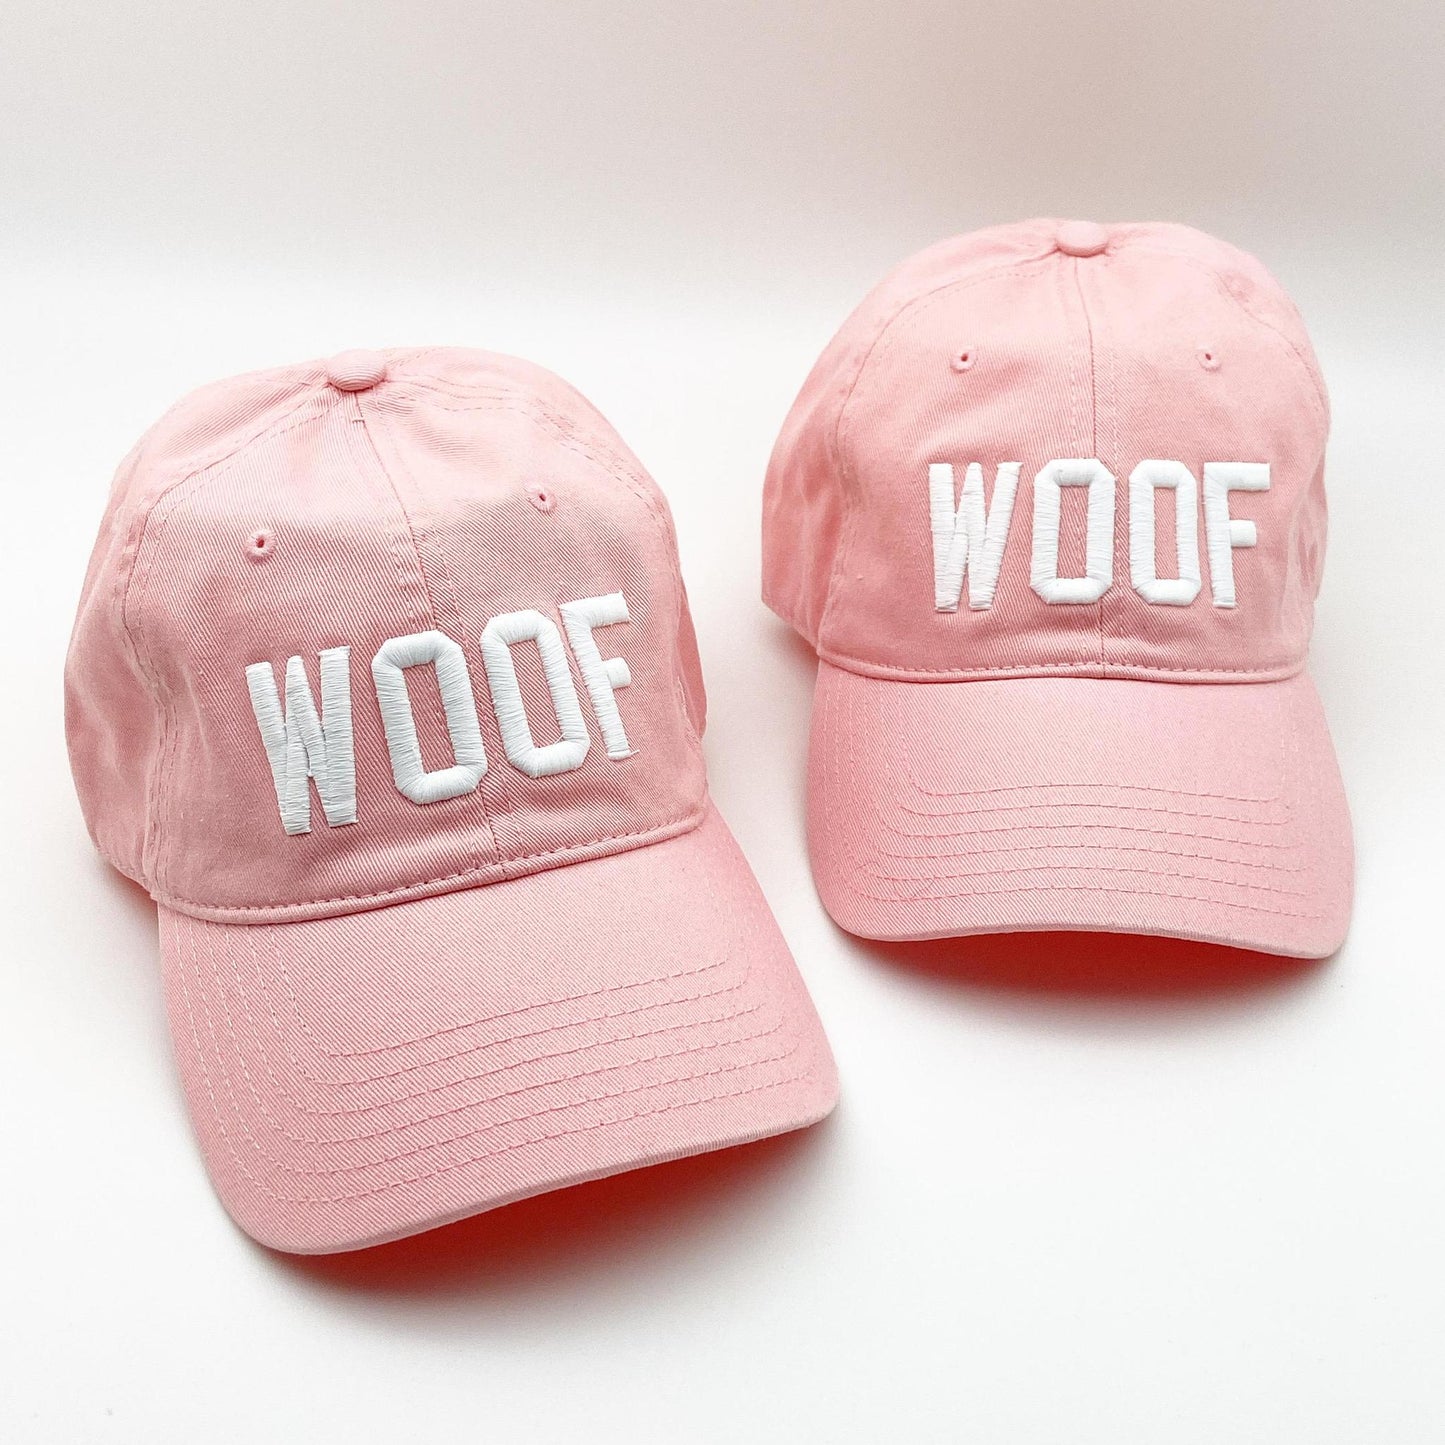 Ballcap - WOOF in White on Pink